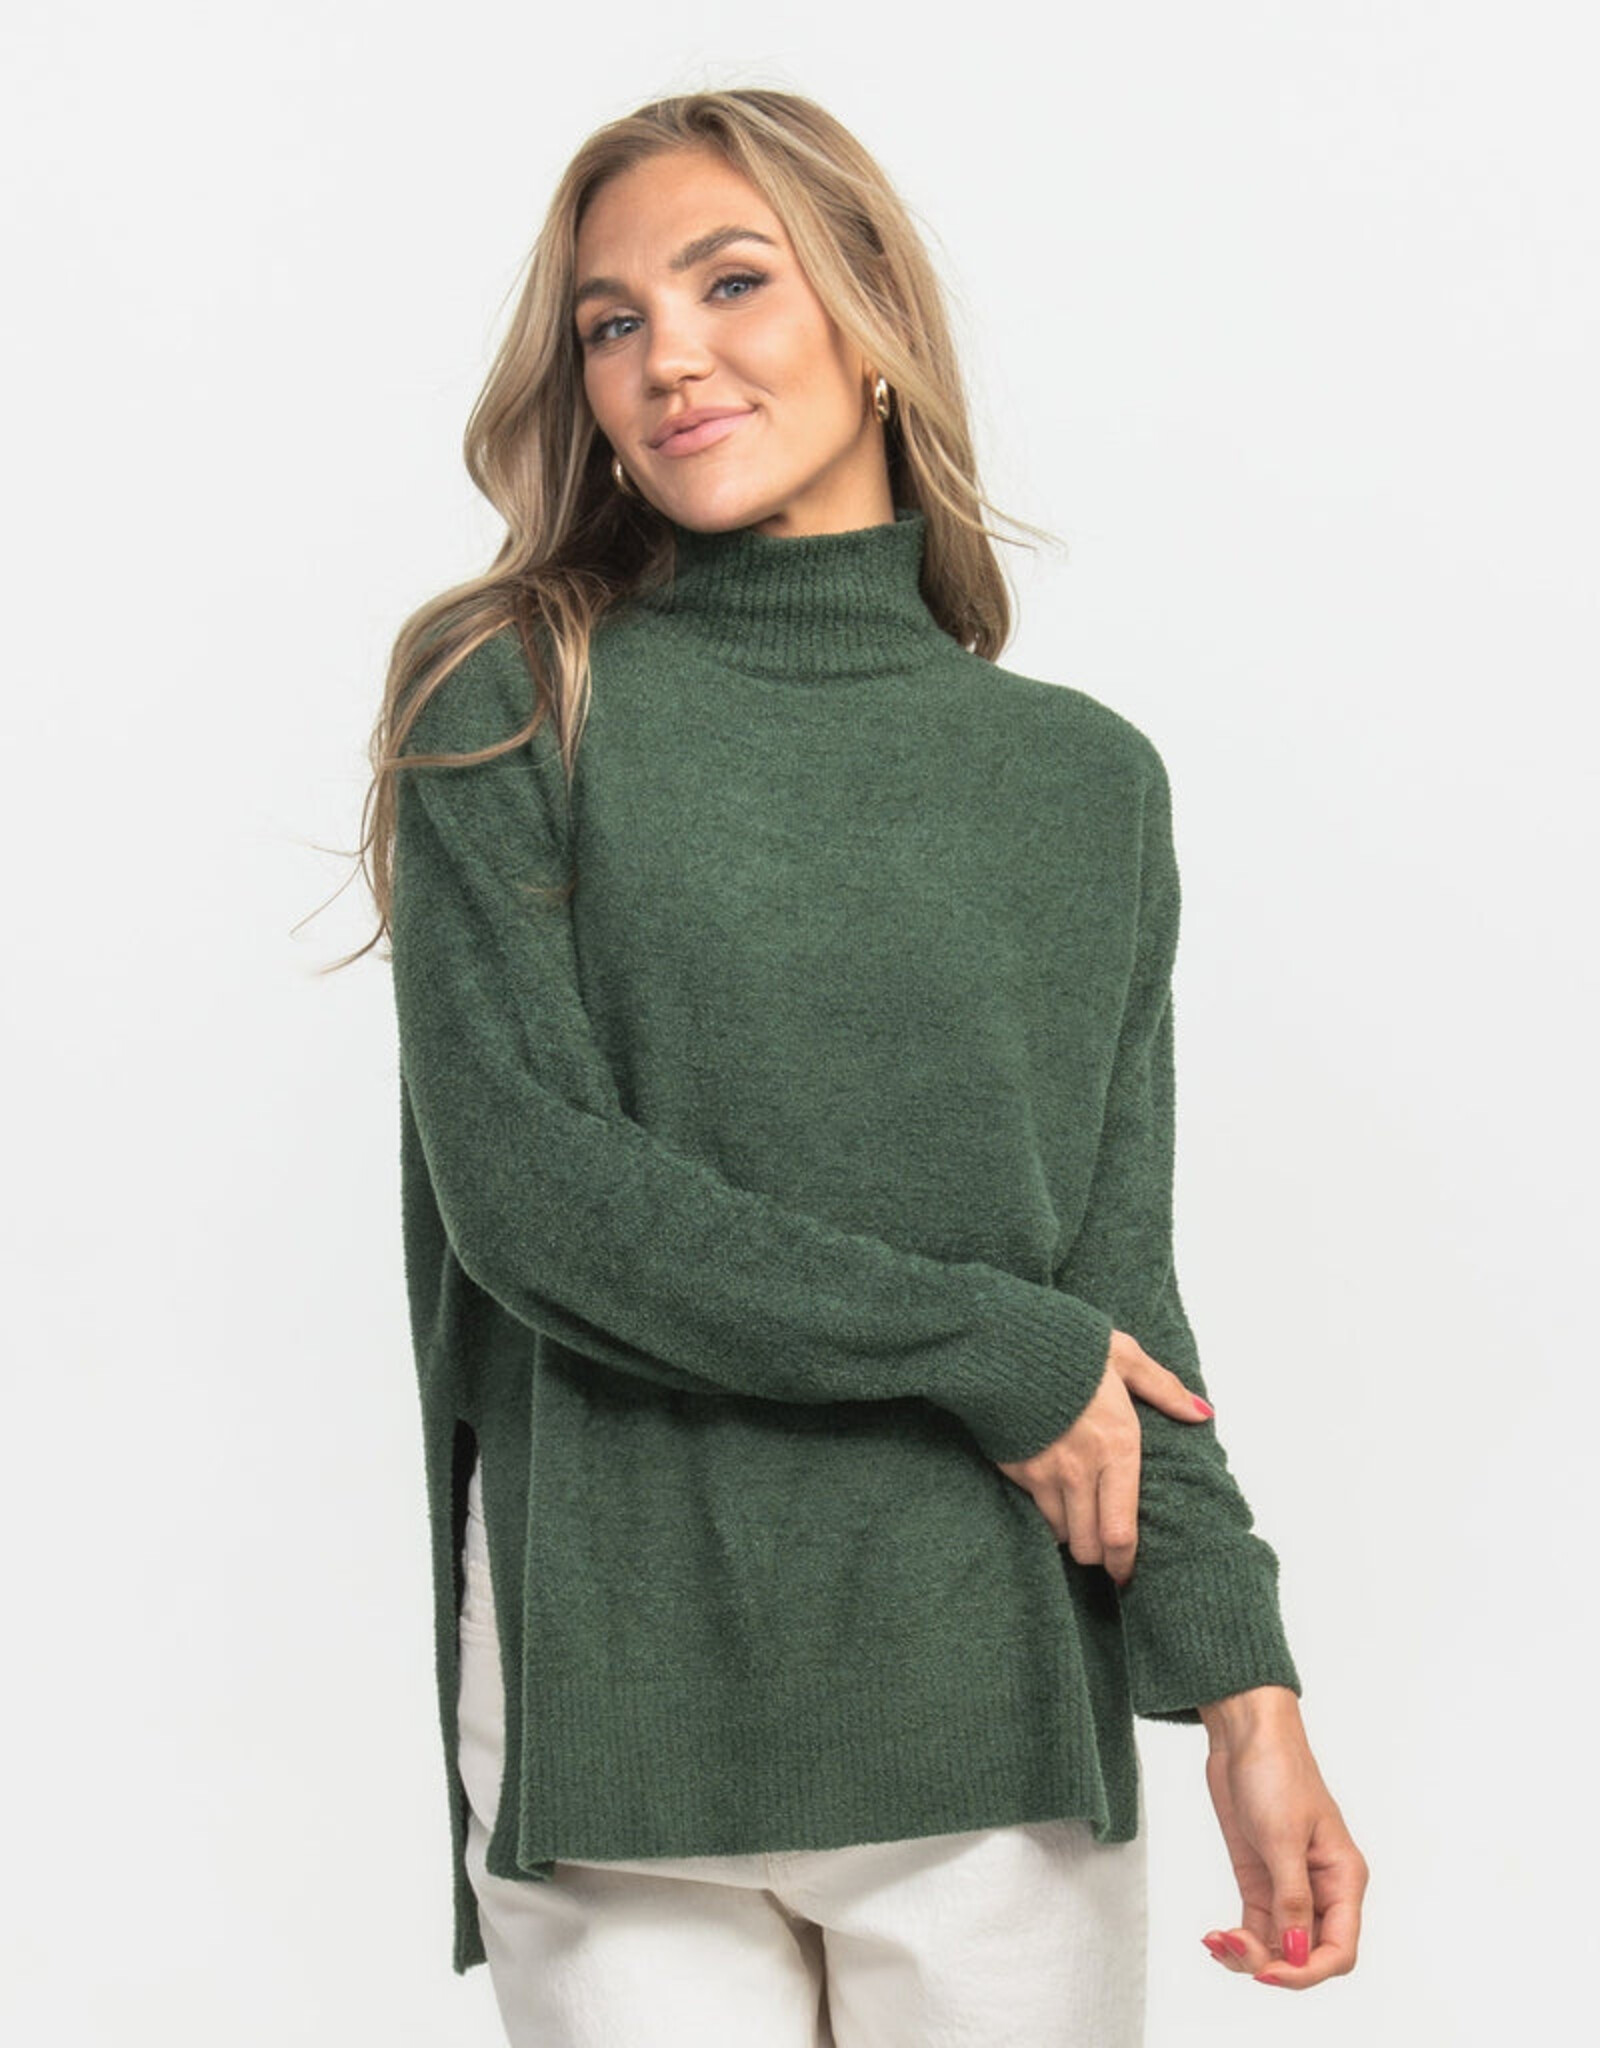 Southern Shirt Dreamluxe Notched Turtlneck Sweater